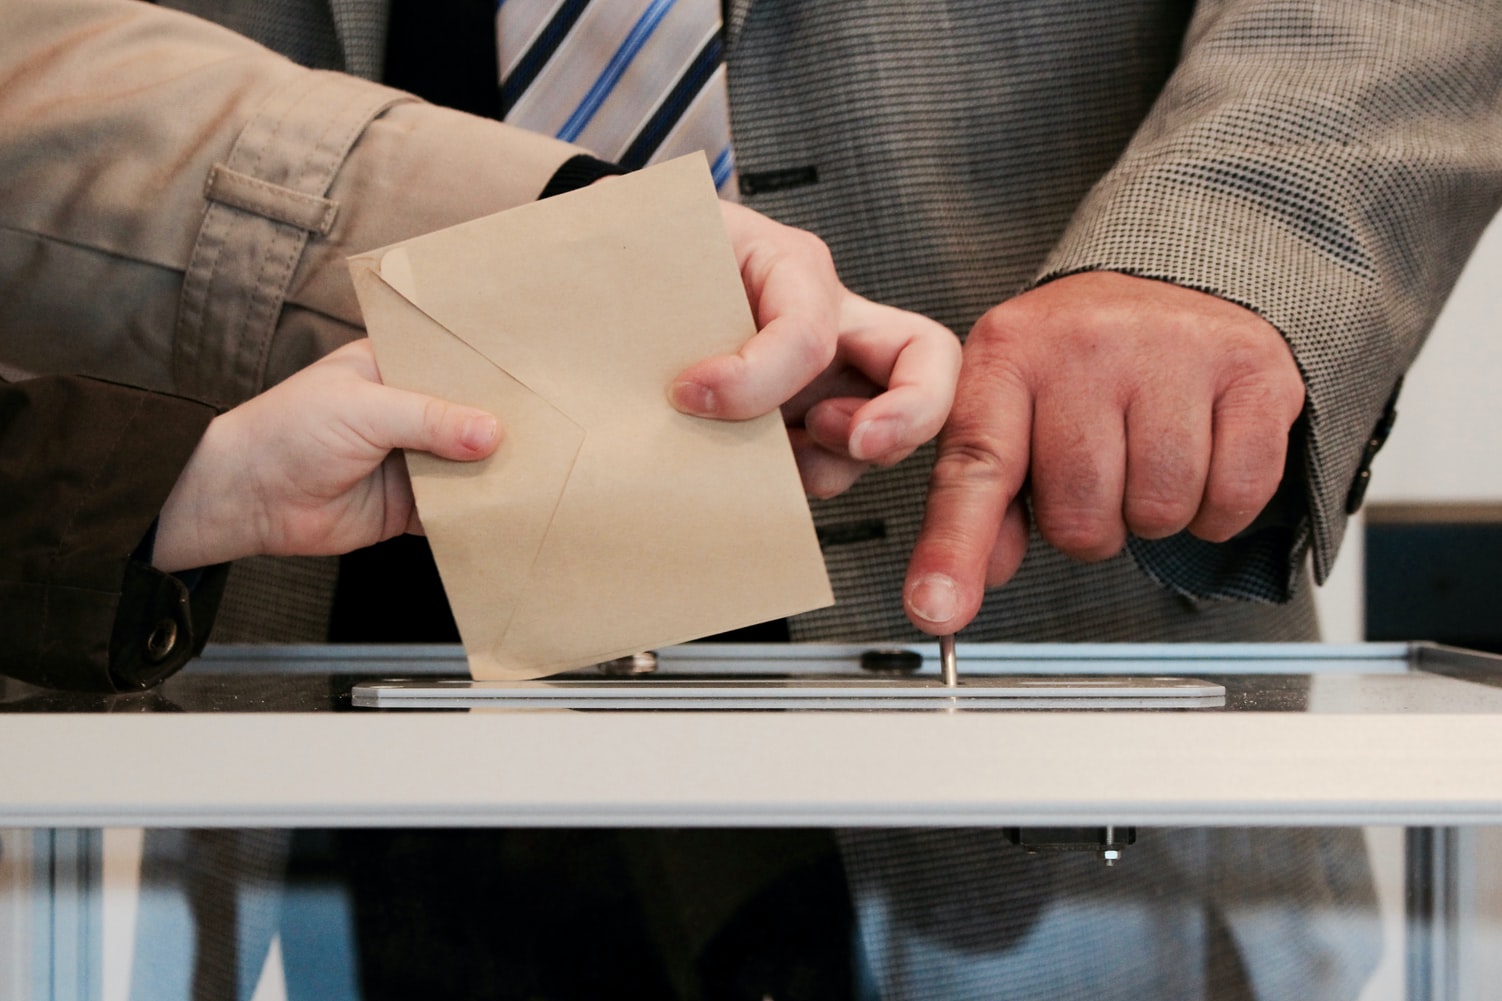 Hands putting a ballot into a voting box